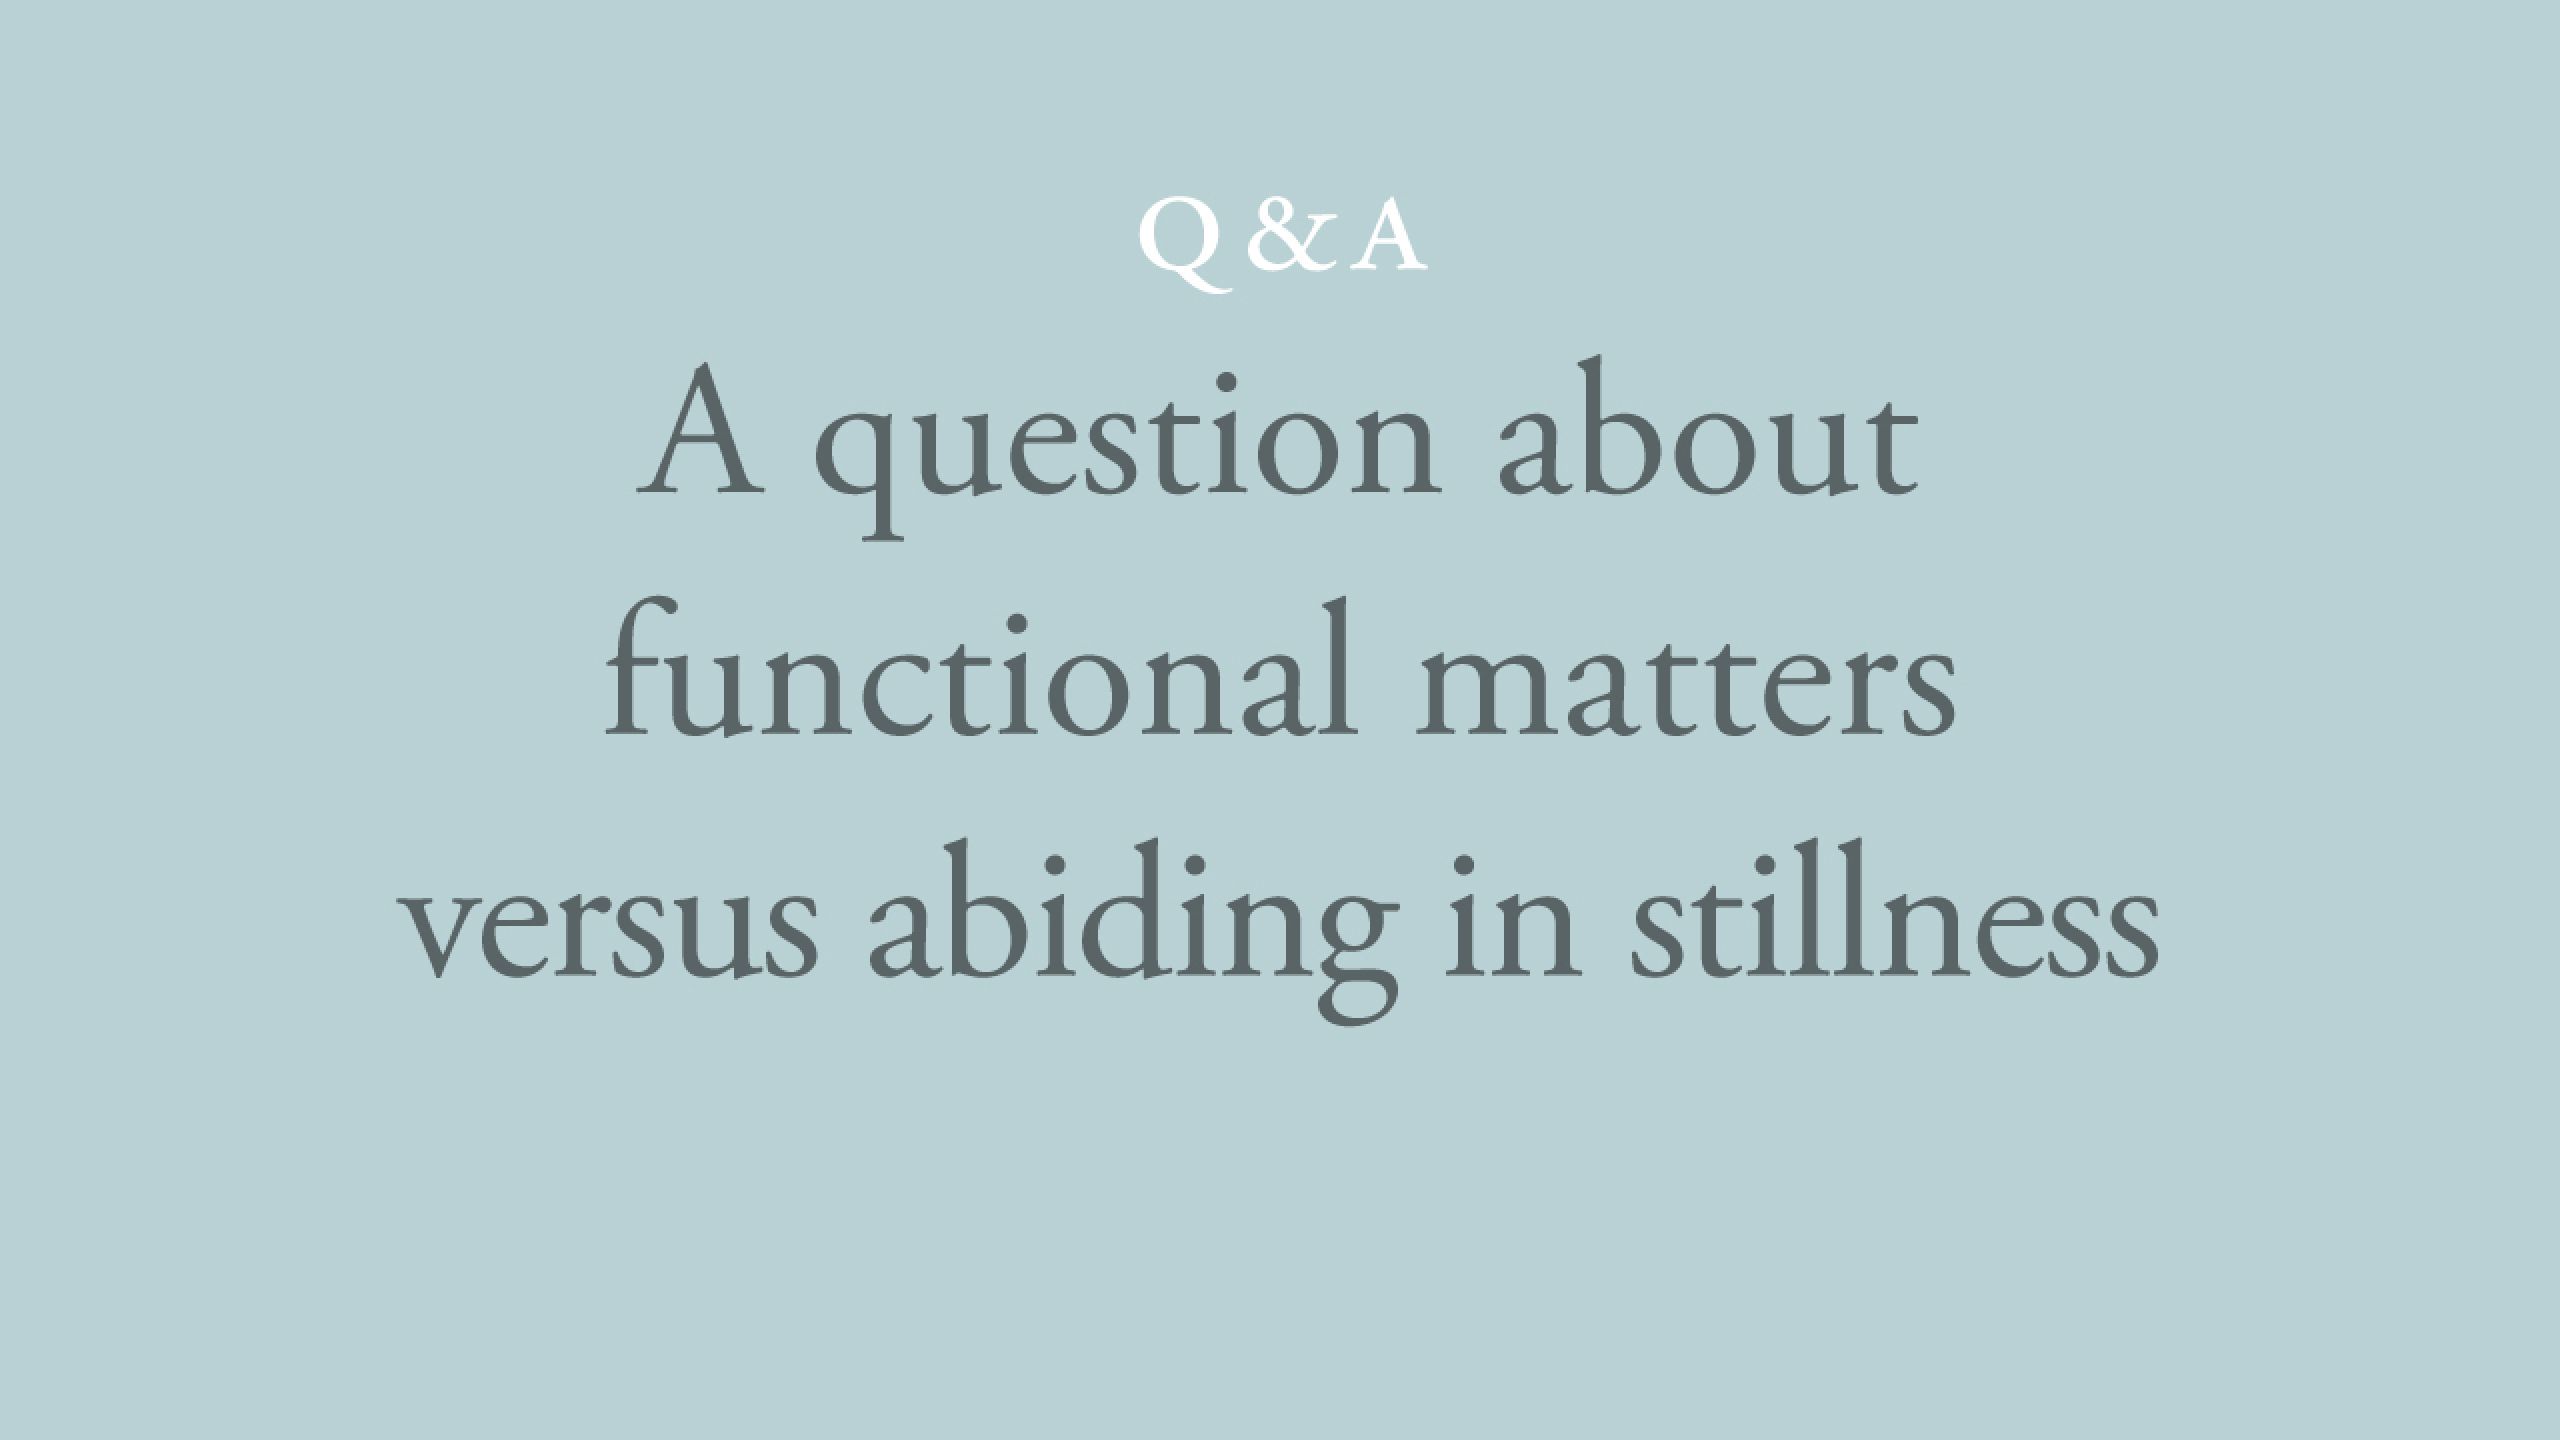 Is attending to functional matters different to abiding in stillness?